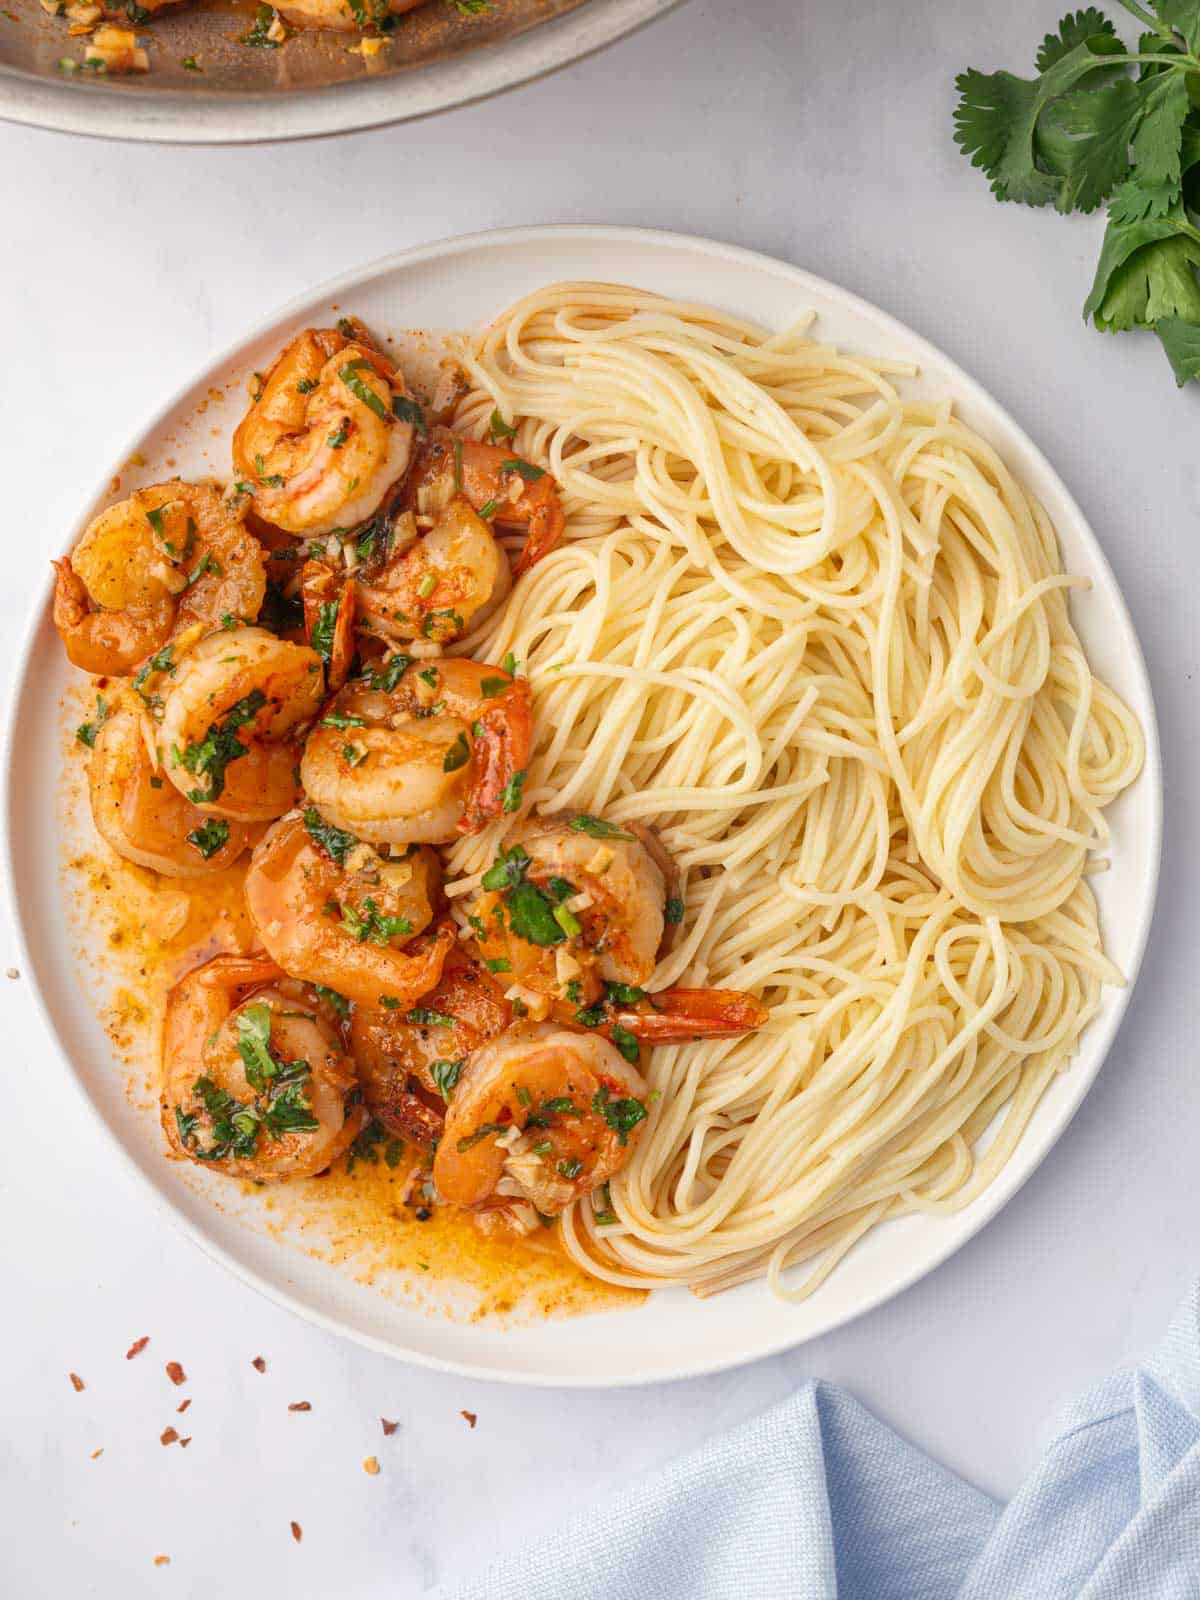 Spicy shrimp scampi pasta on a white plate.